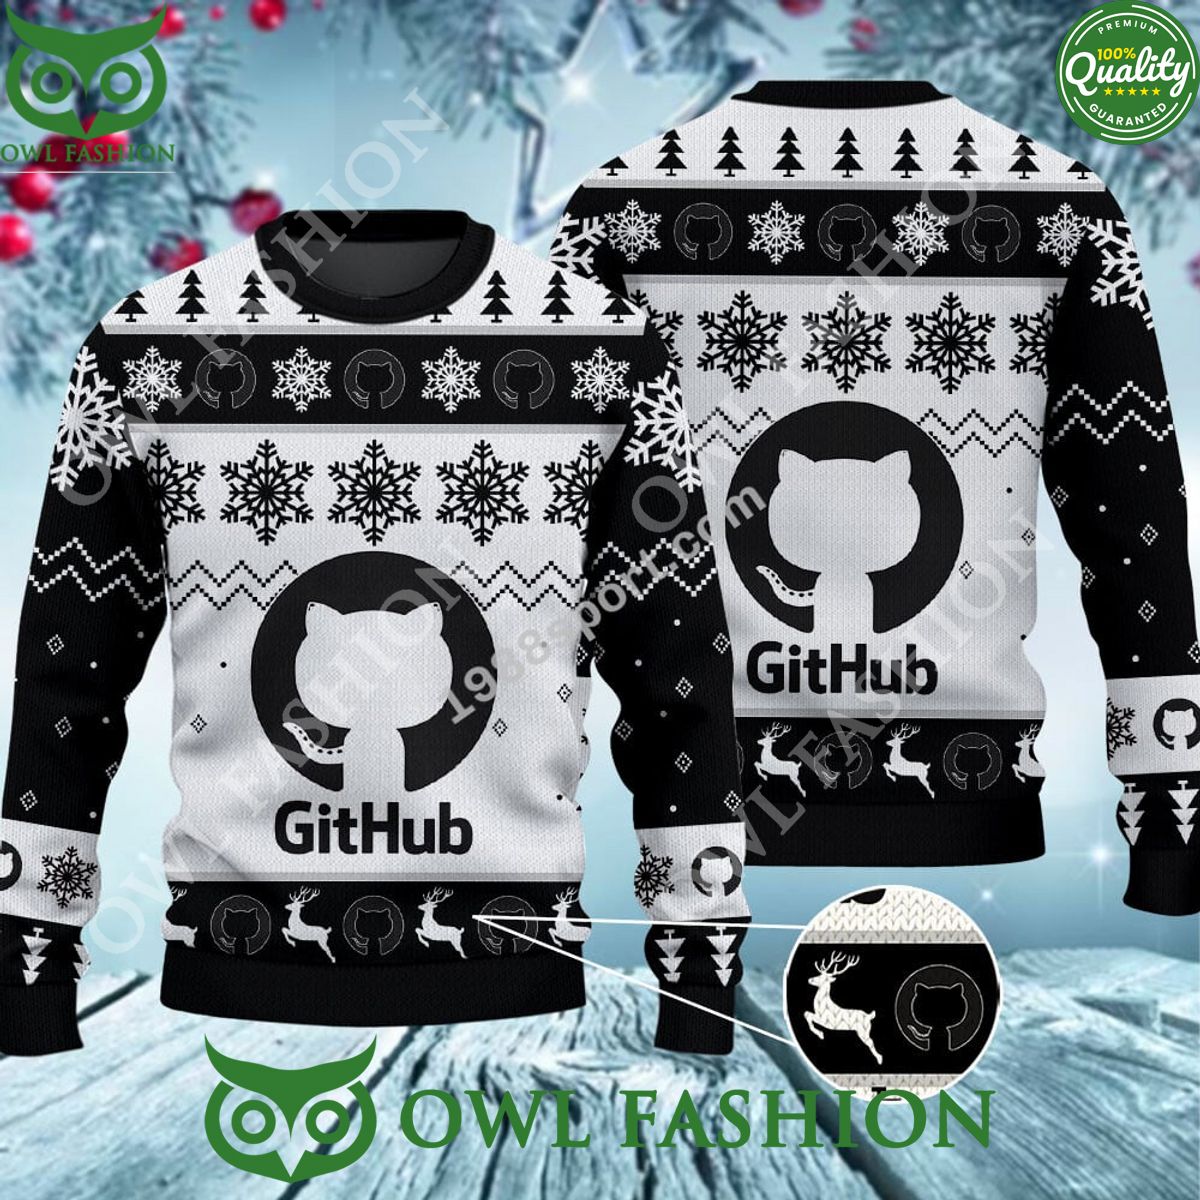 Github New Ugly Sweater Jumper This design stands out from the crowd.